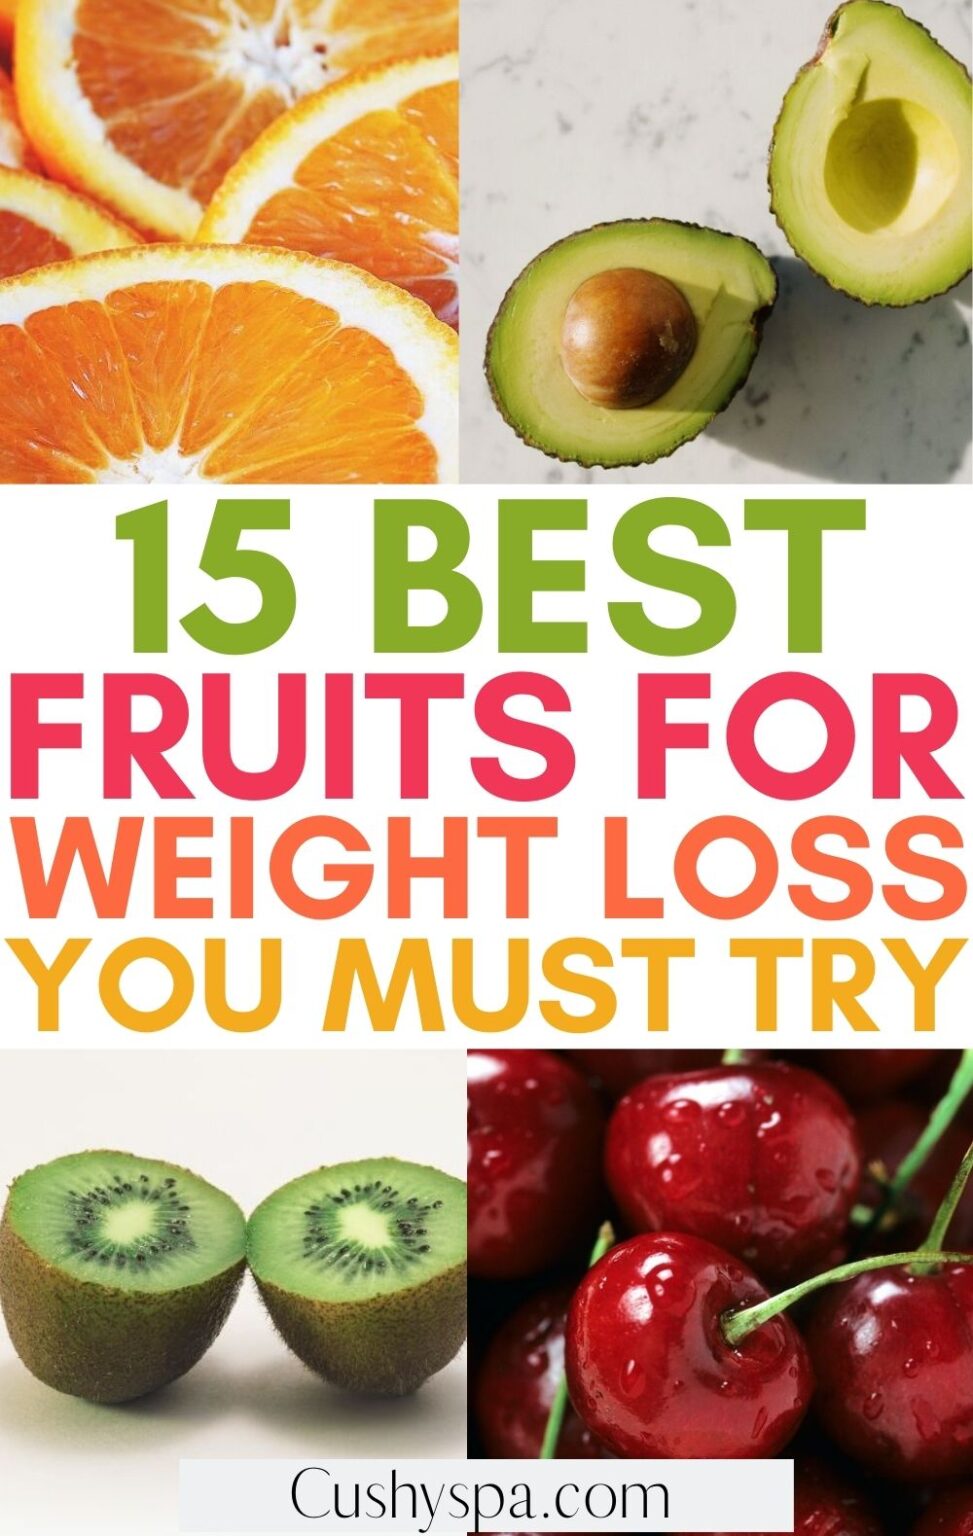 15 Best Fruits for Weight Loss - Cushy Spa